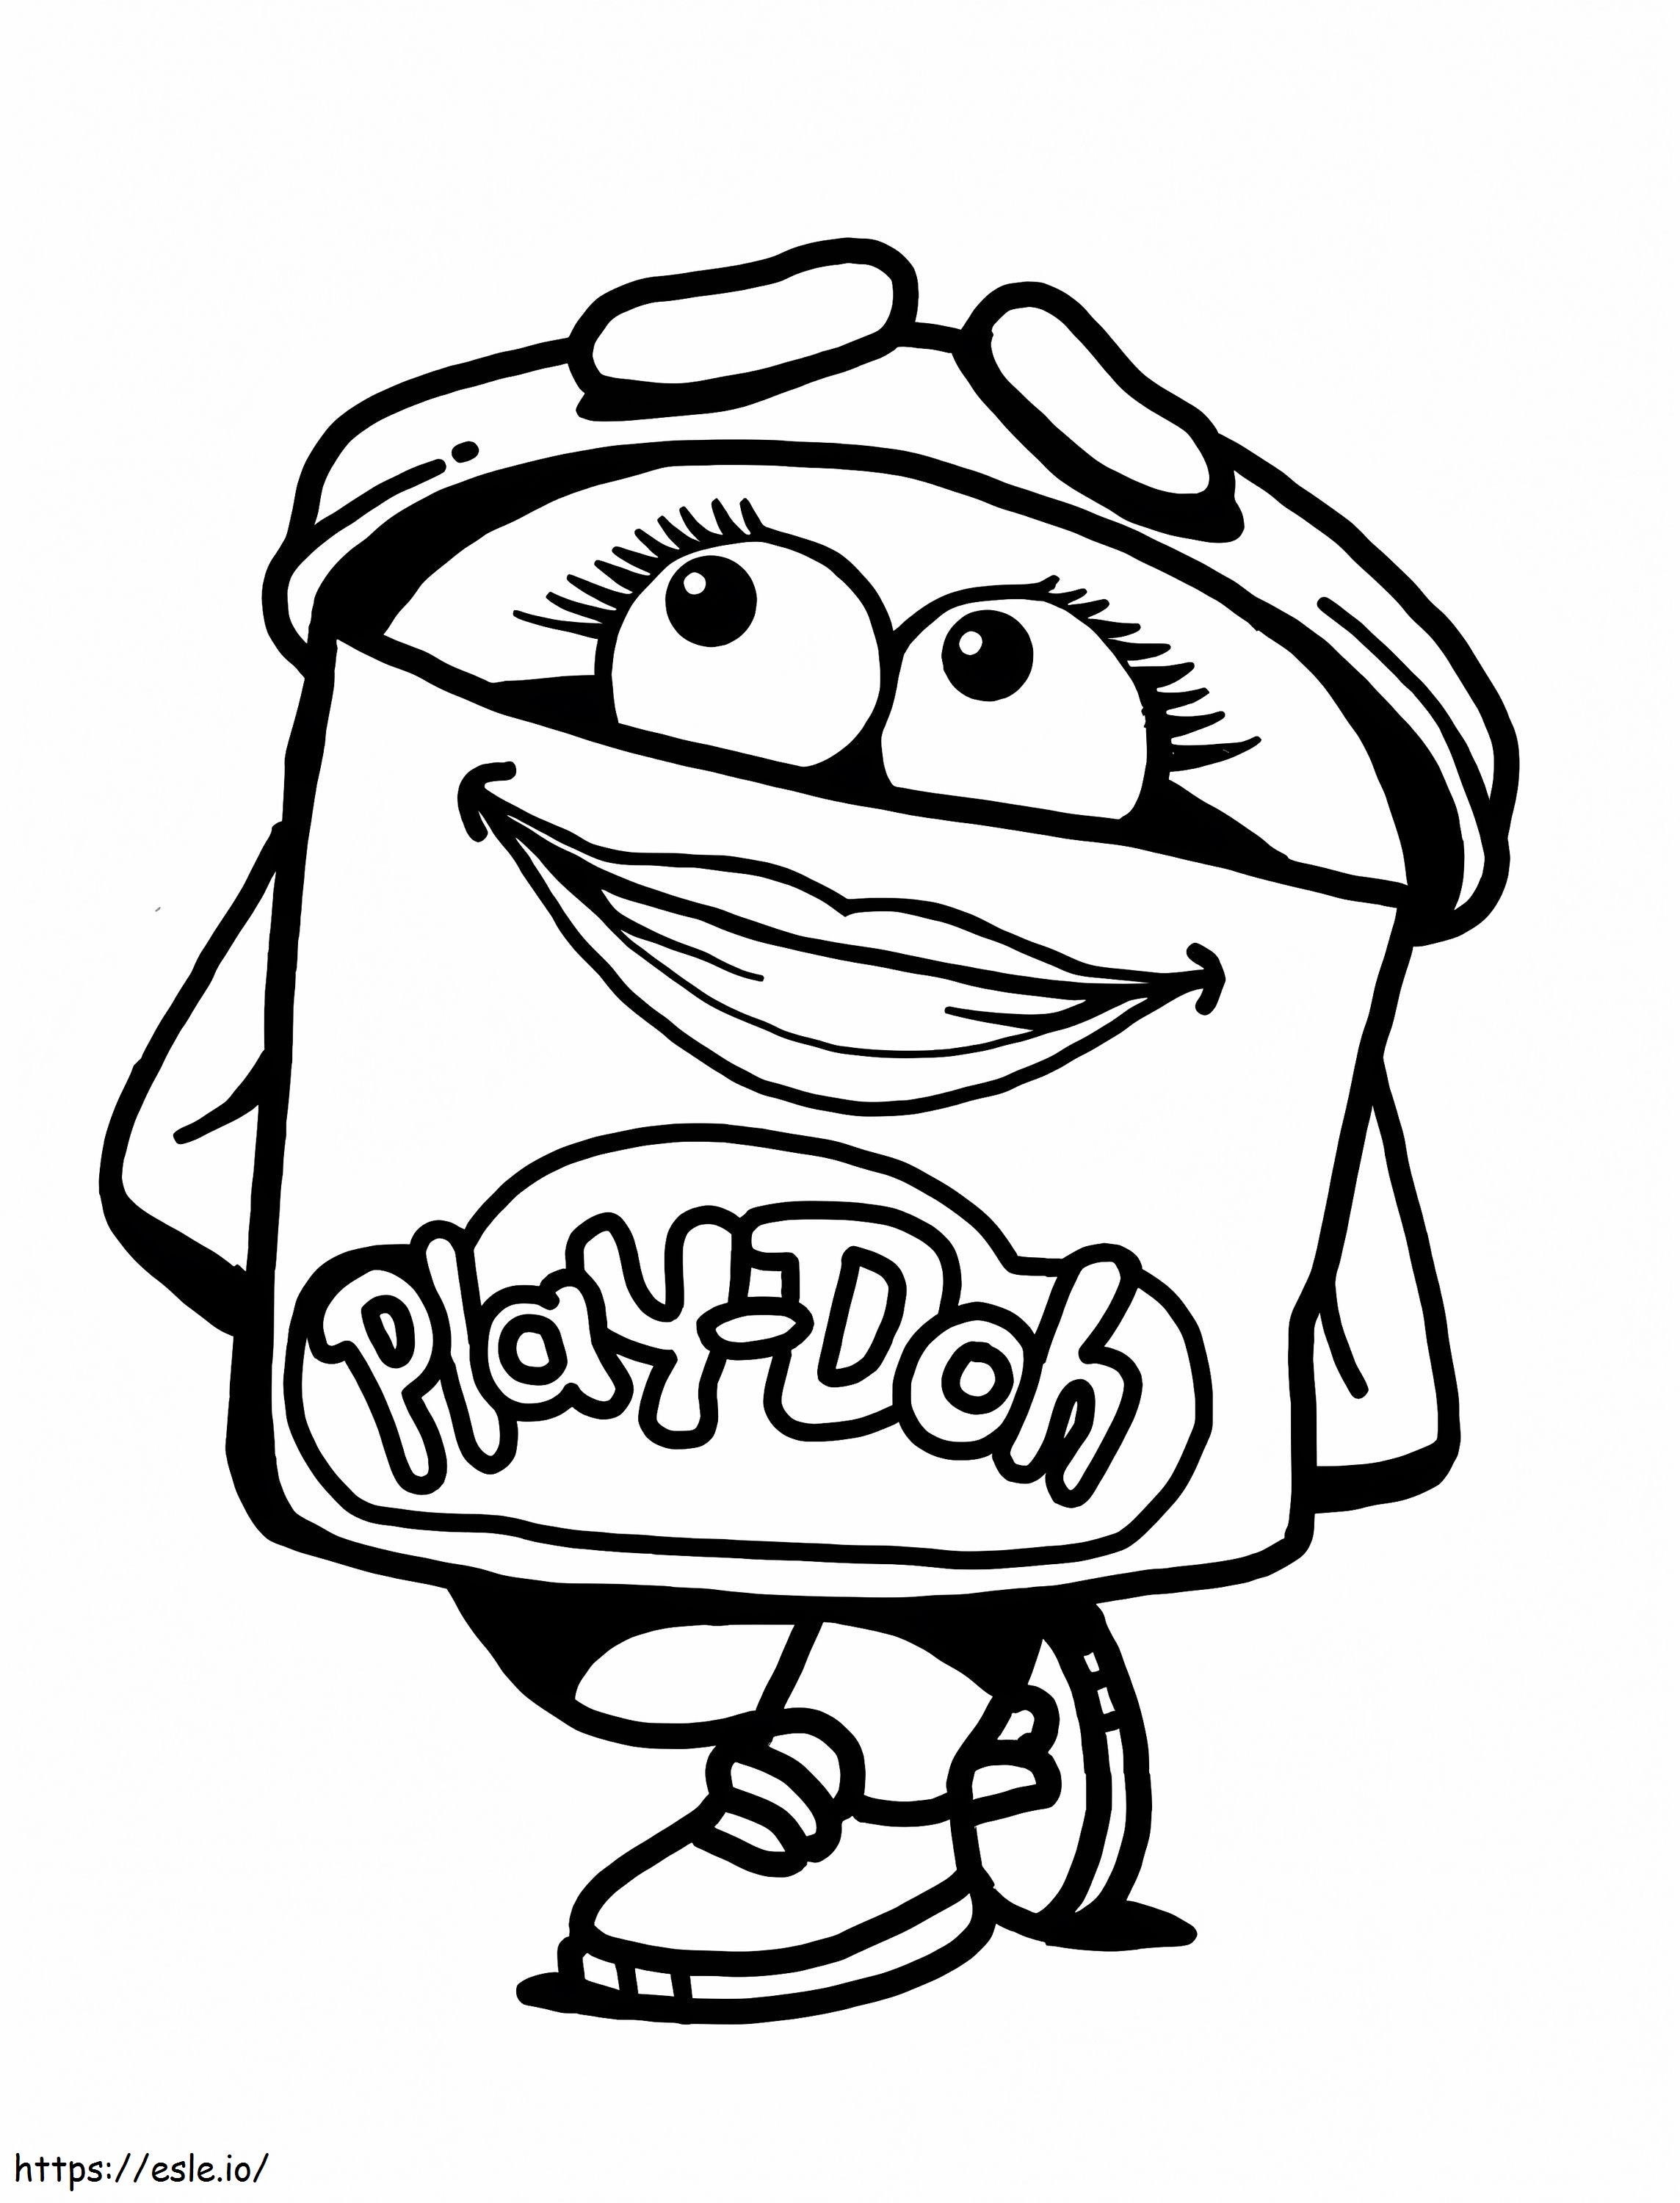 Play-Doh Logo Black and White - Get Coloring Pages